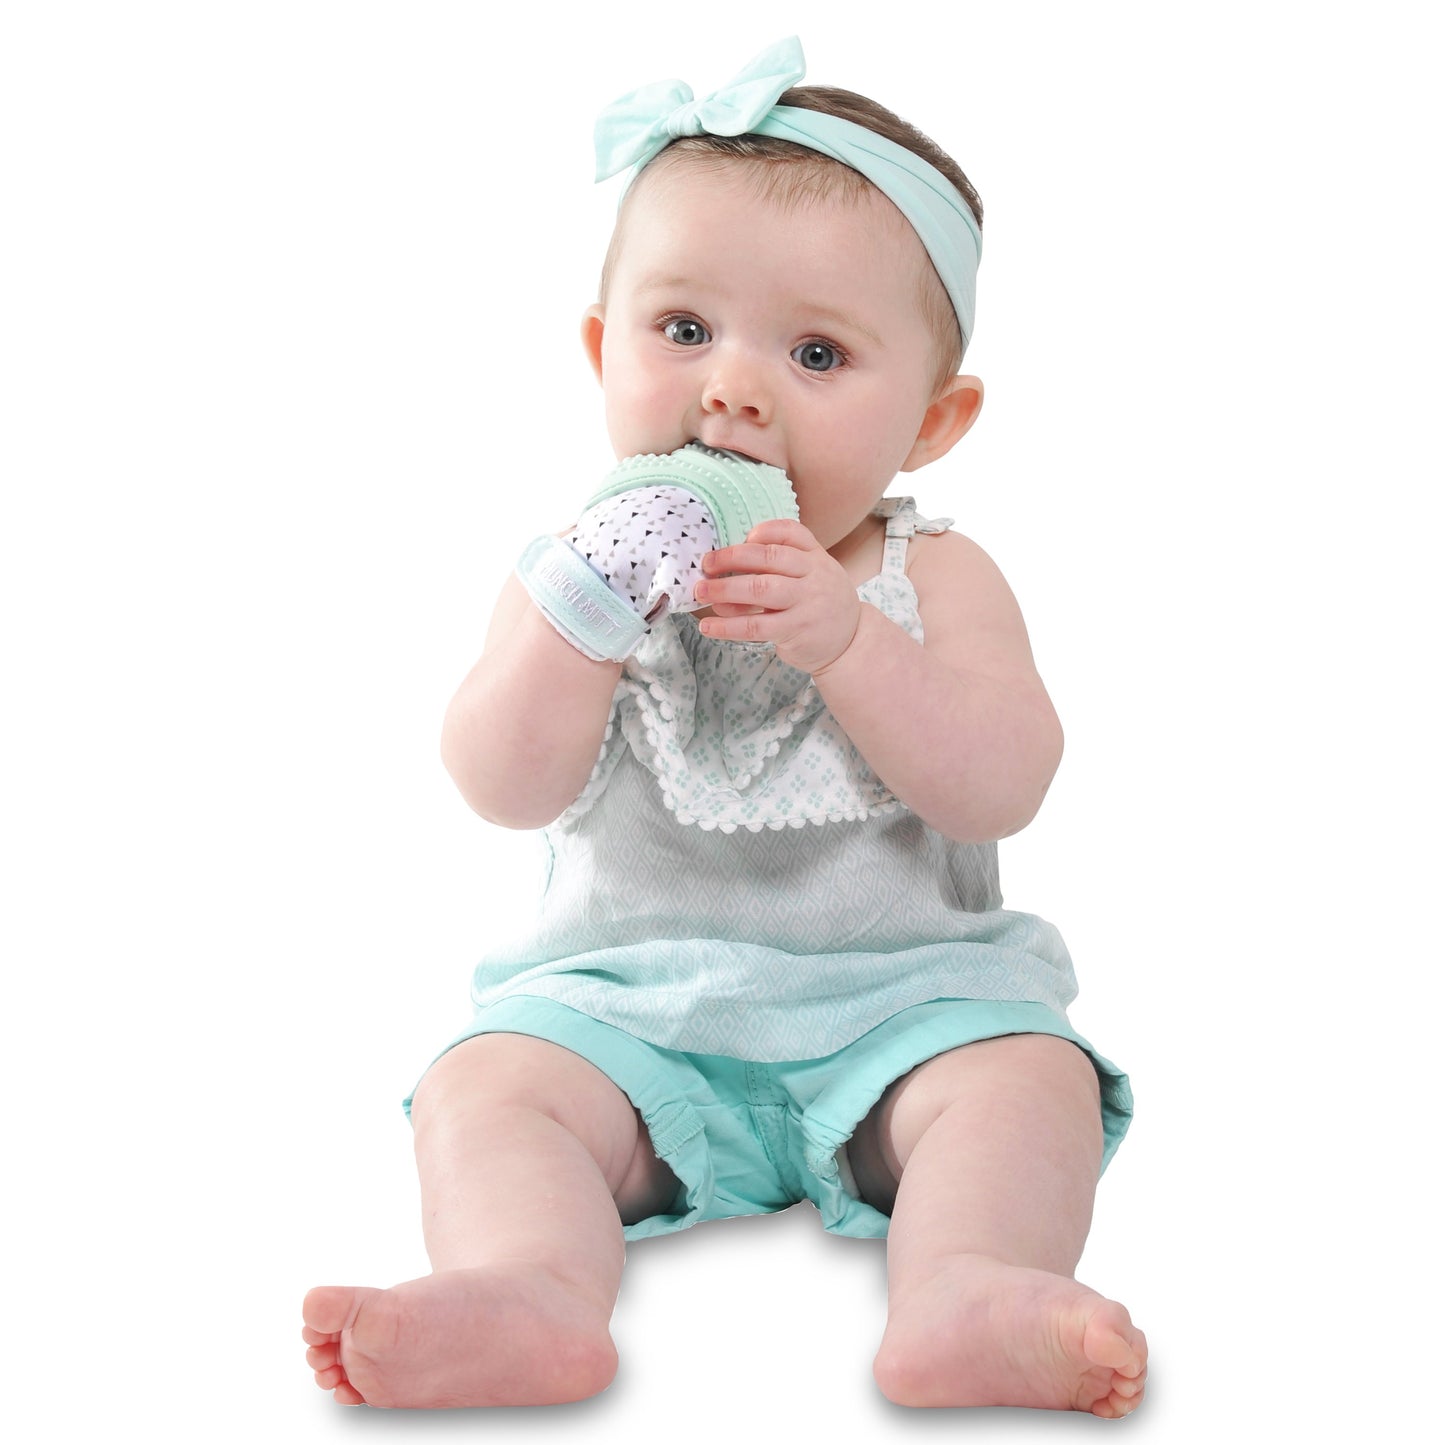 mint green triangle MUNCH MITT THE ORIGINAL MOM INVENTED HAND HELD TEETHER.  100% FOOD-GRADE SILICONE. HELPS BABY WITH SELF SOOTHING